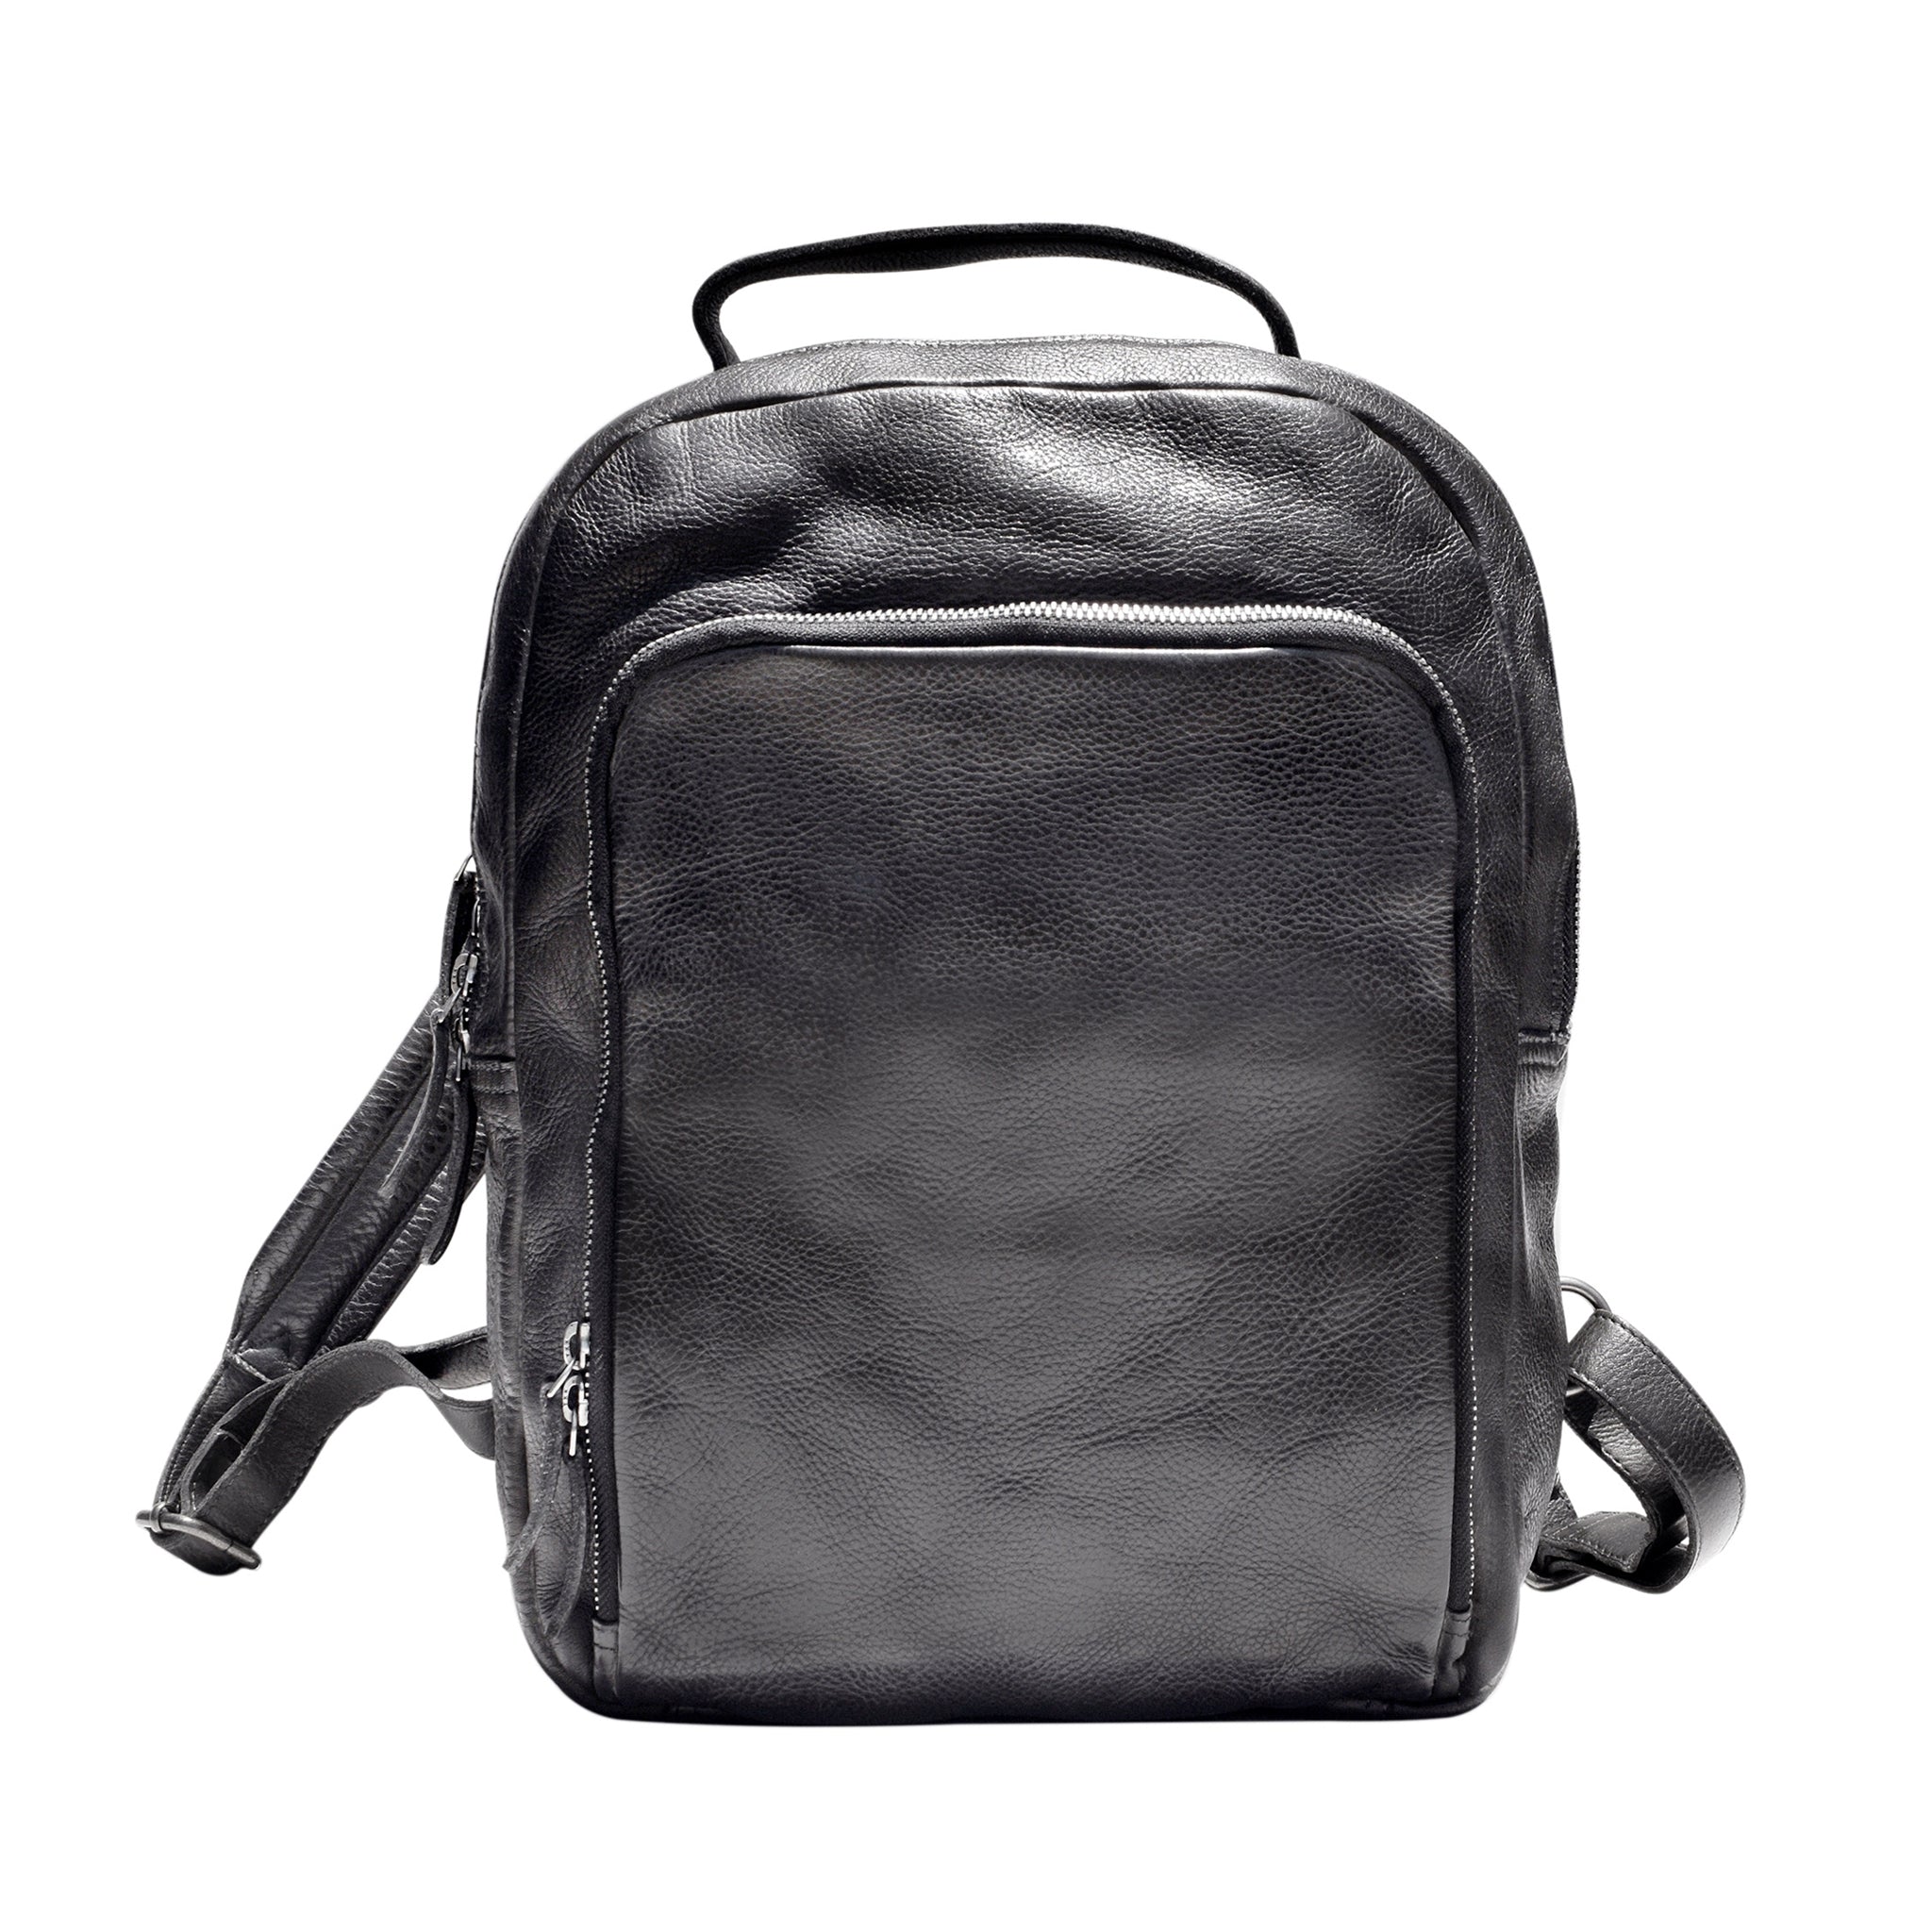 Zurich Backpack – Latico Leathers